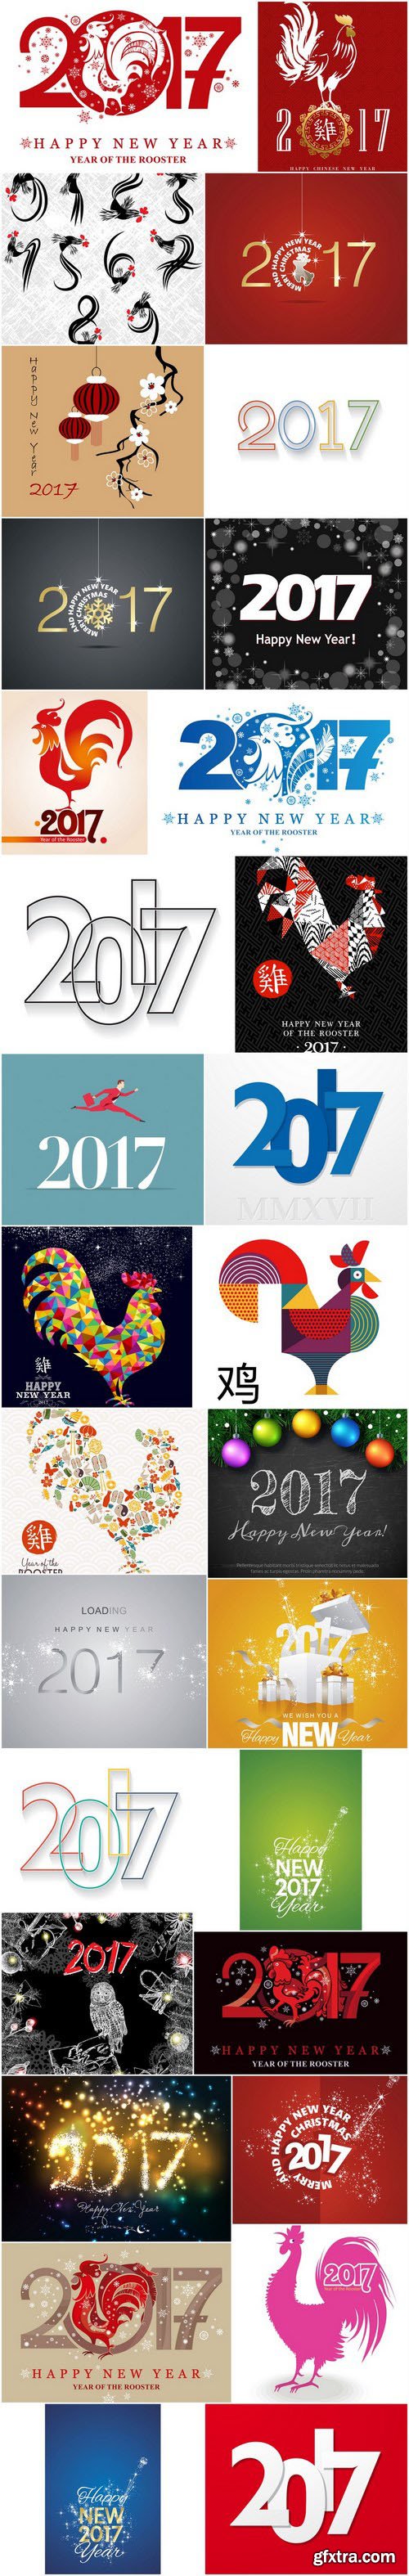 2017 - The Year of Fire Rooster - Set of 30xEPS Professional Vector Stock